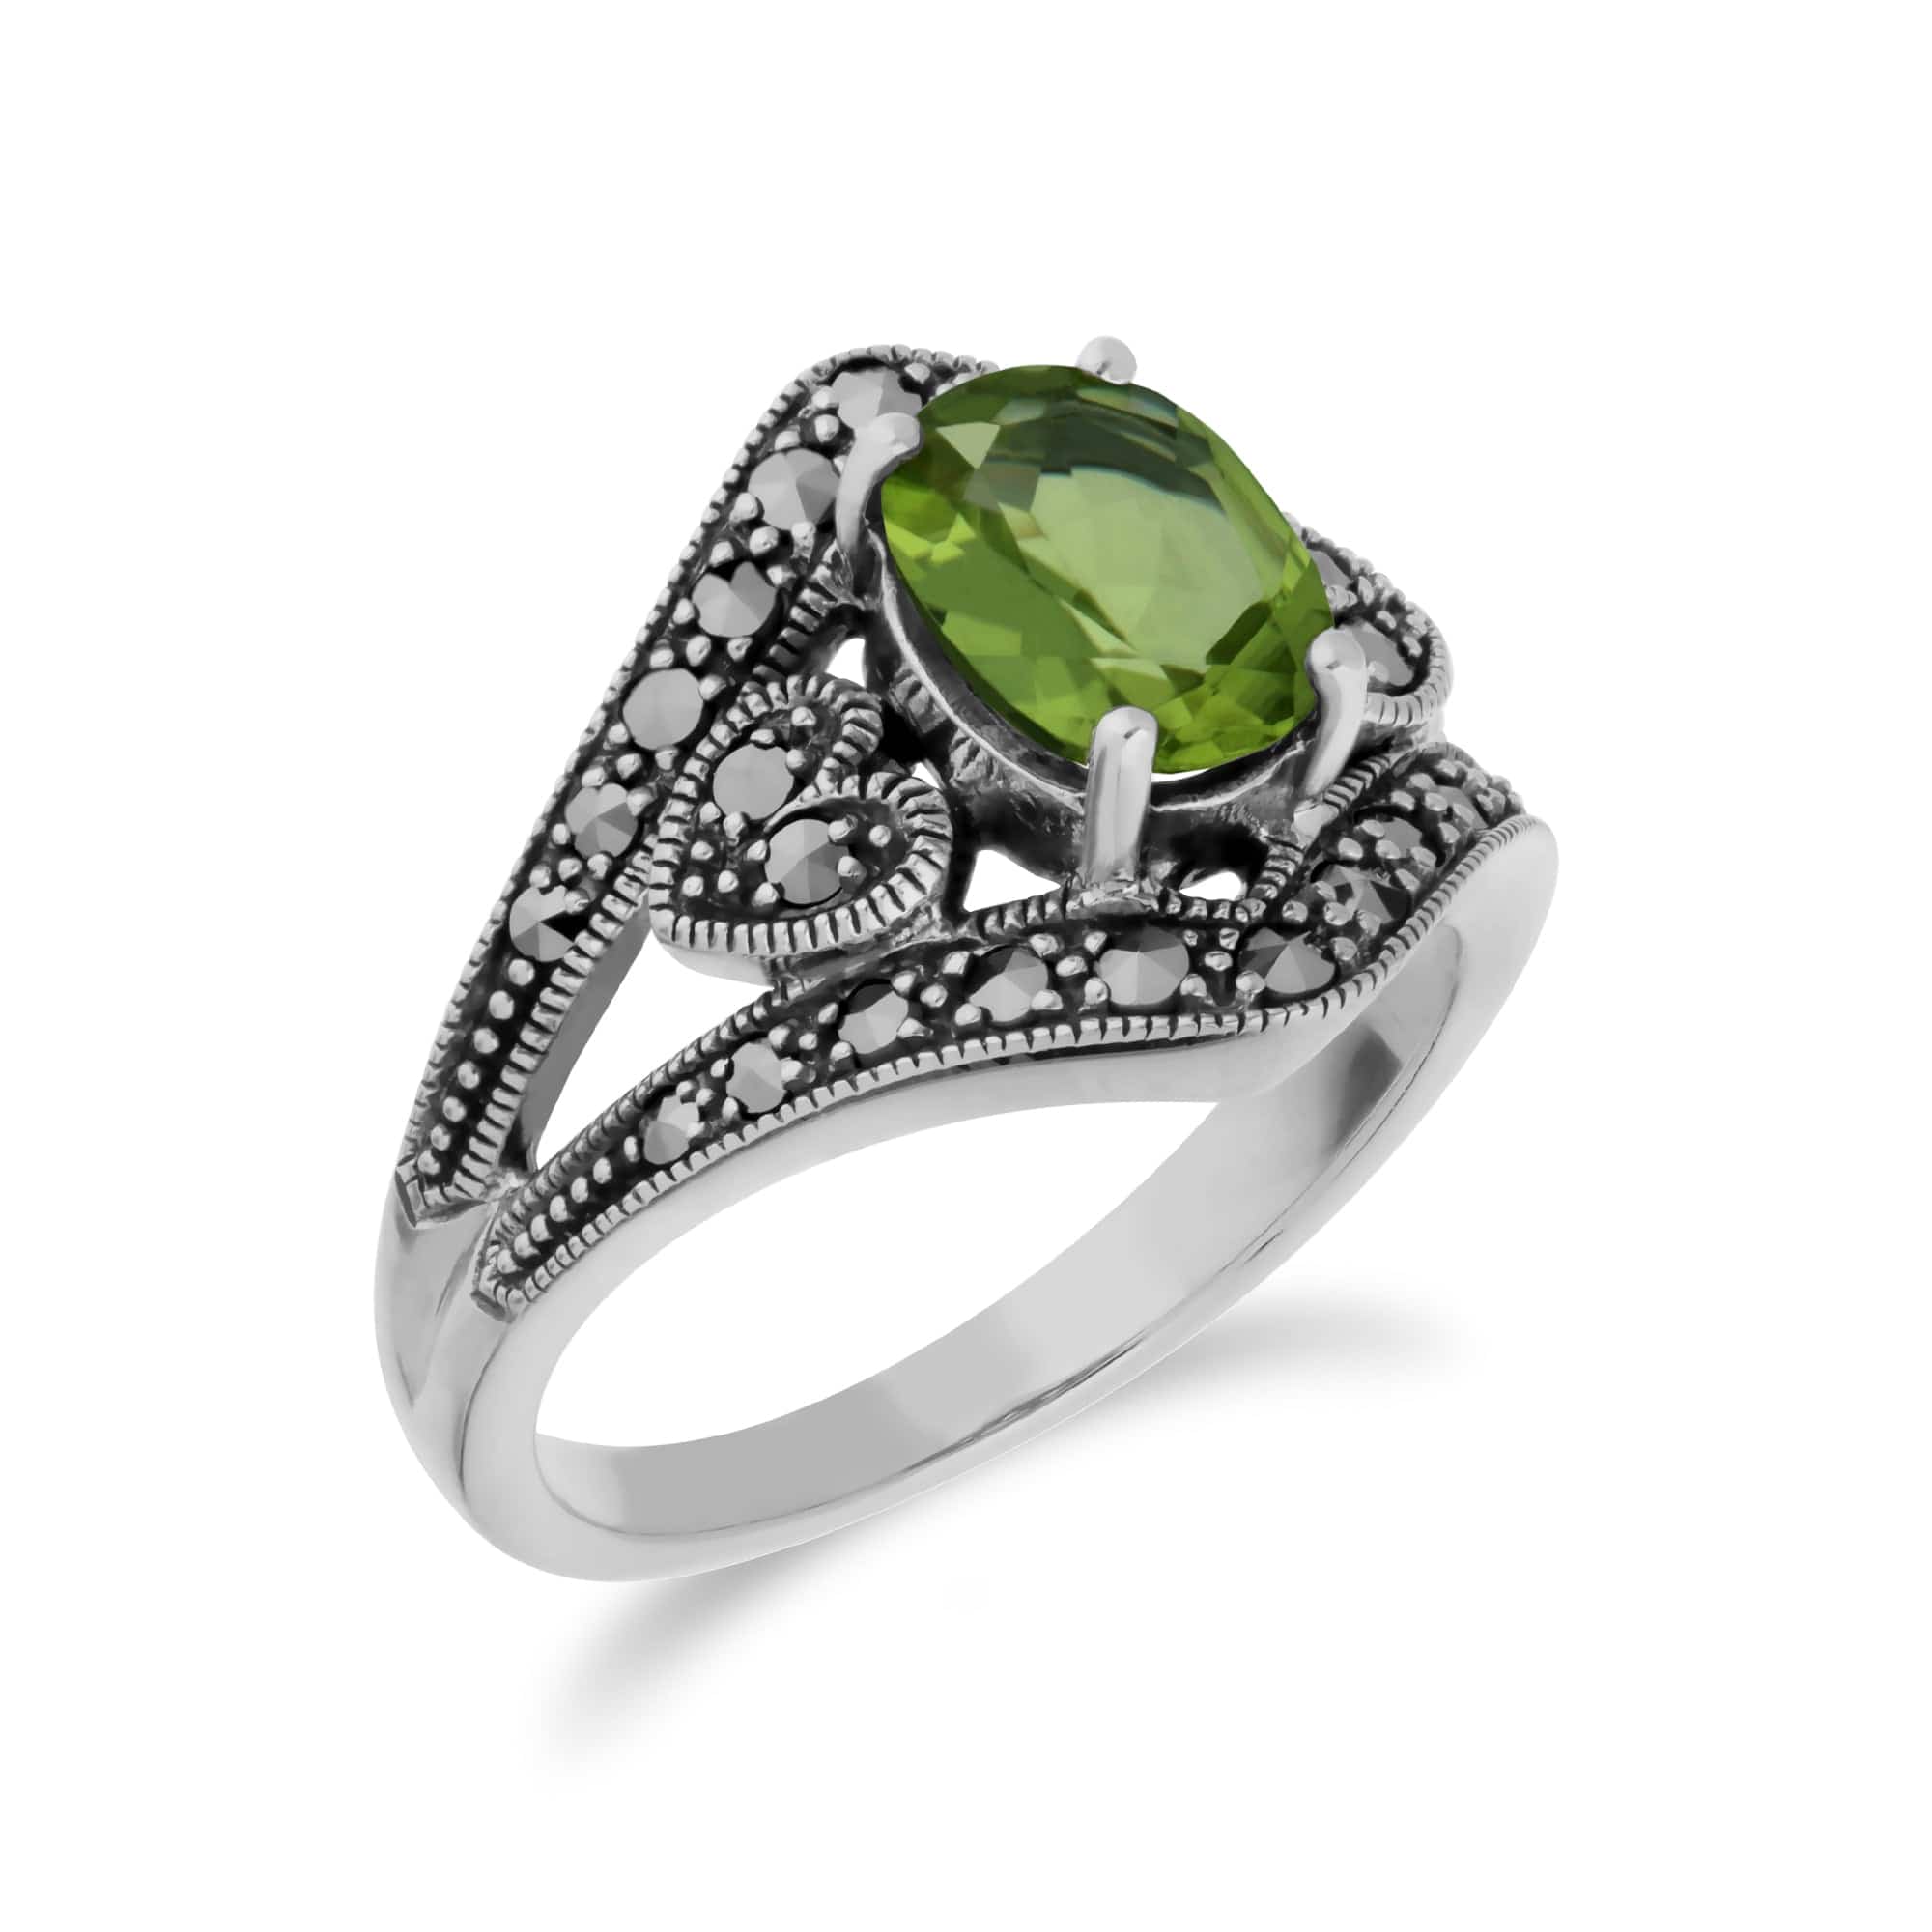 214R404904925 Art Deco Style Oval Peridot & Marcasite in 925 Sterling Silver 2